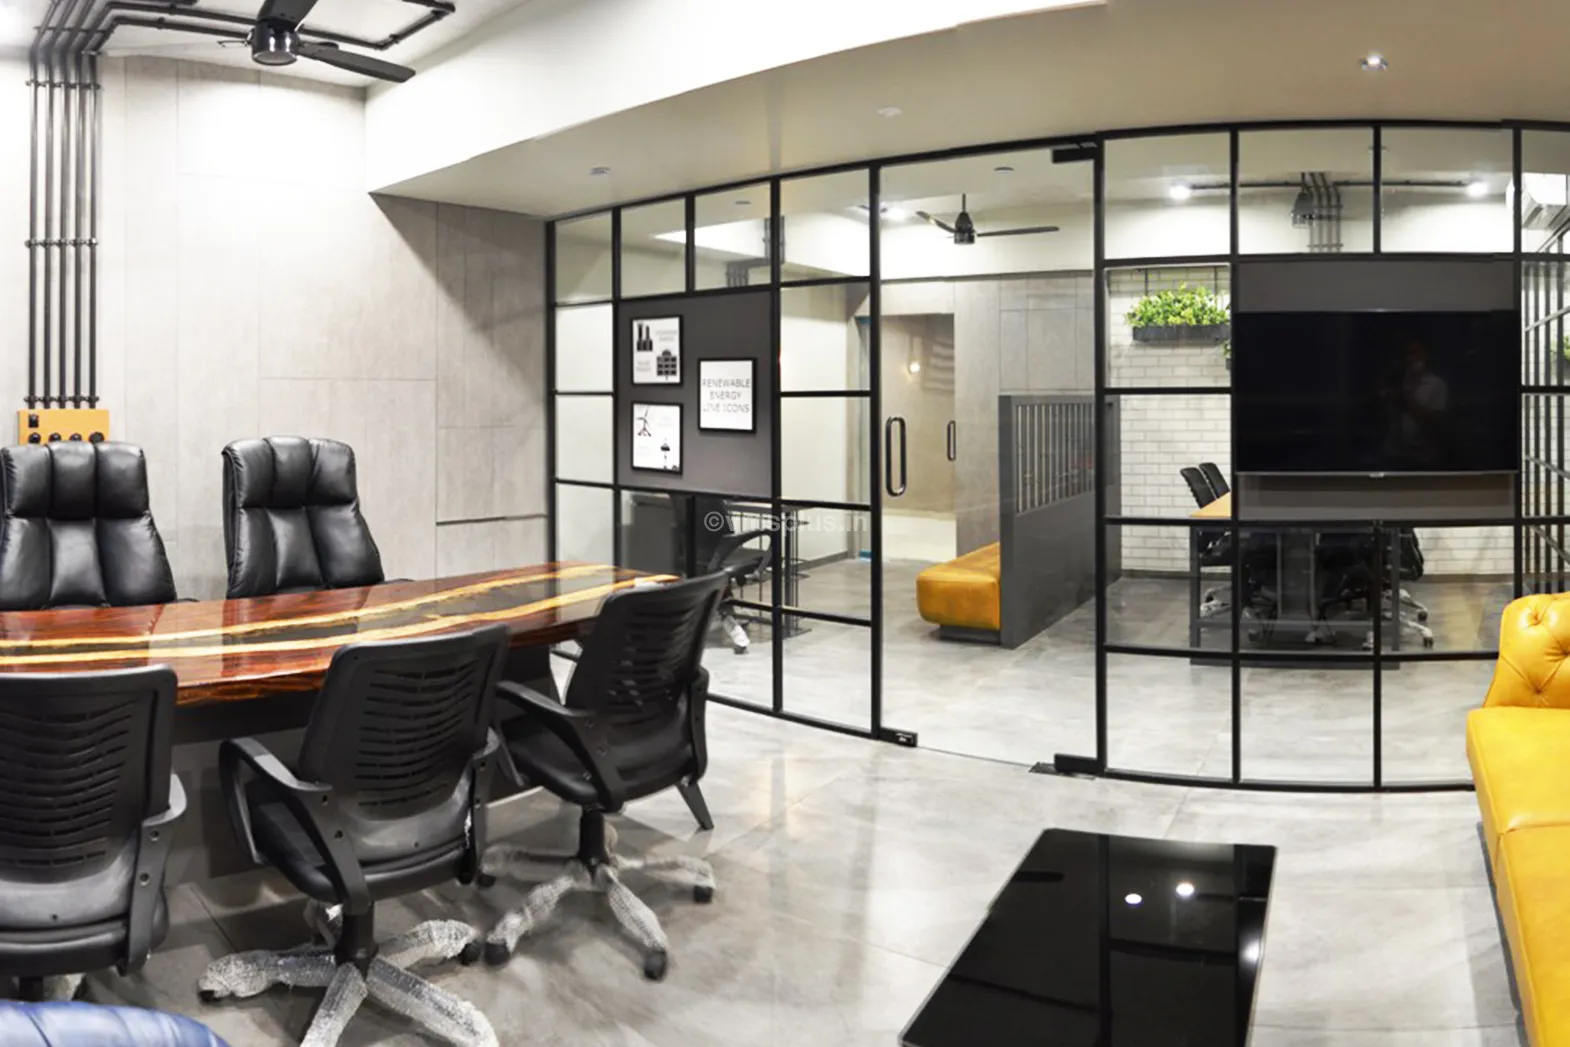 Why Install Glass Partitions for Office?